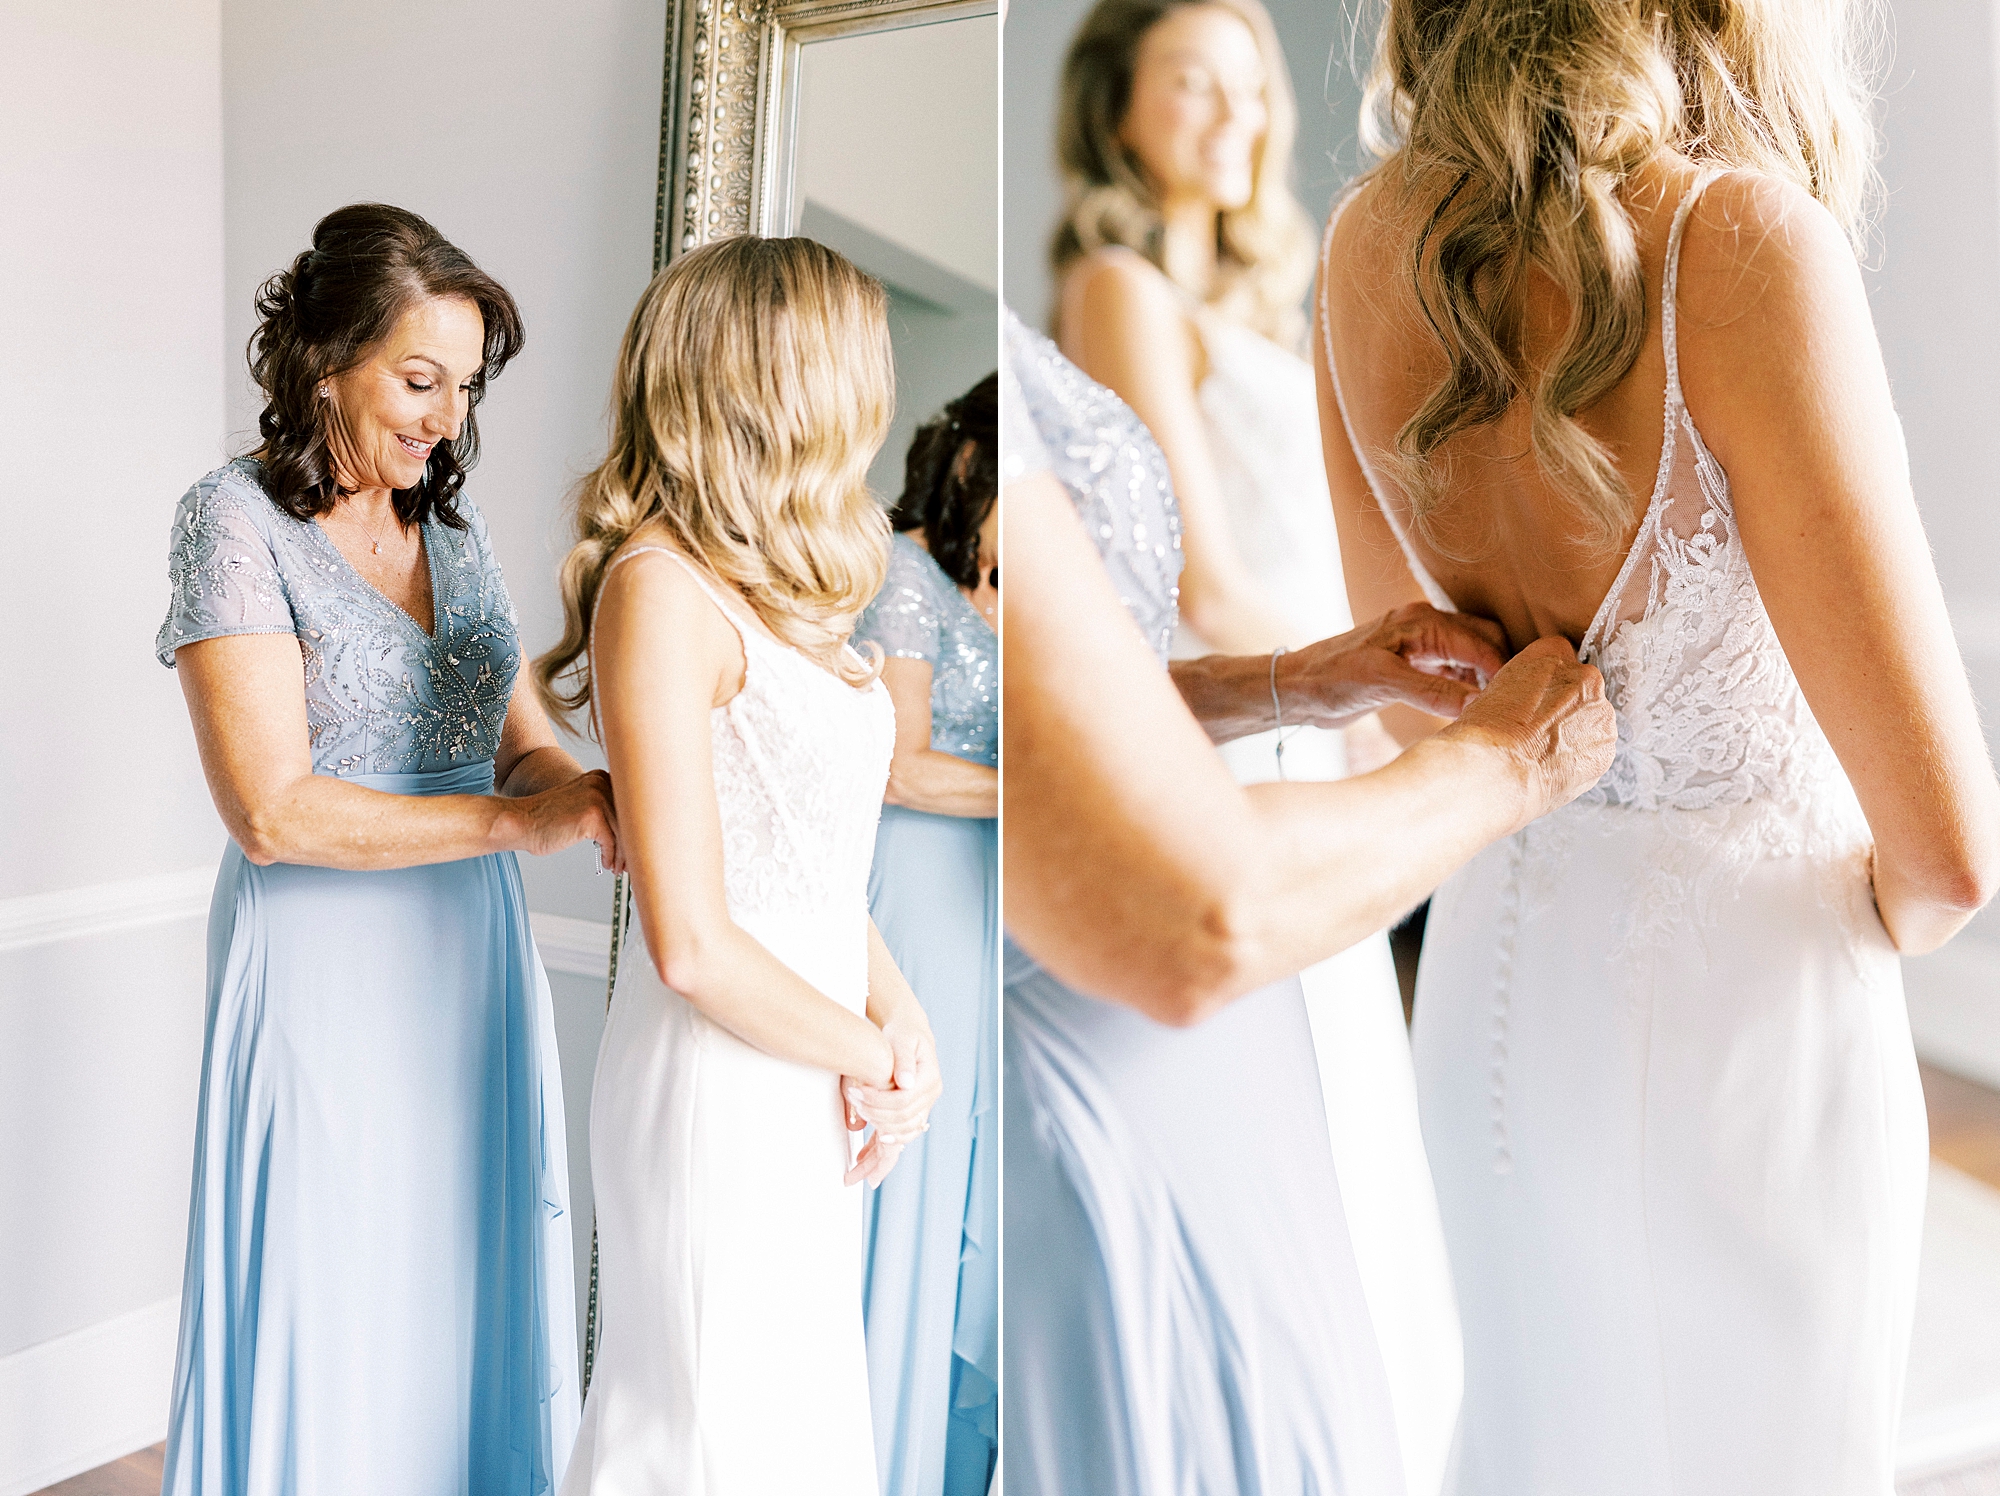 bridesmaid in blue dress helps bride into wedding gown at Separk Mansion